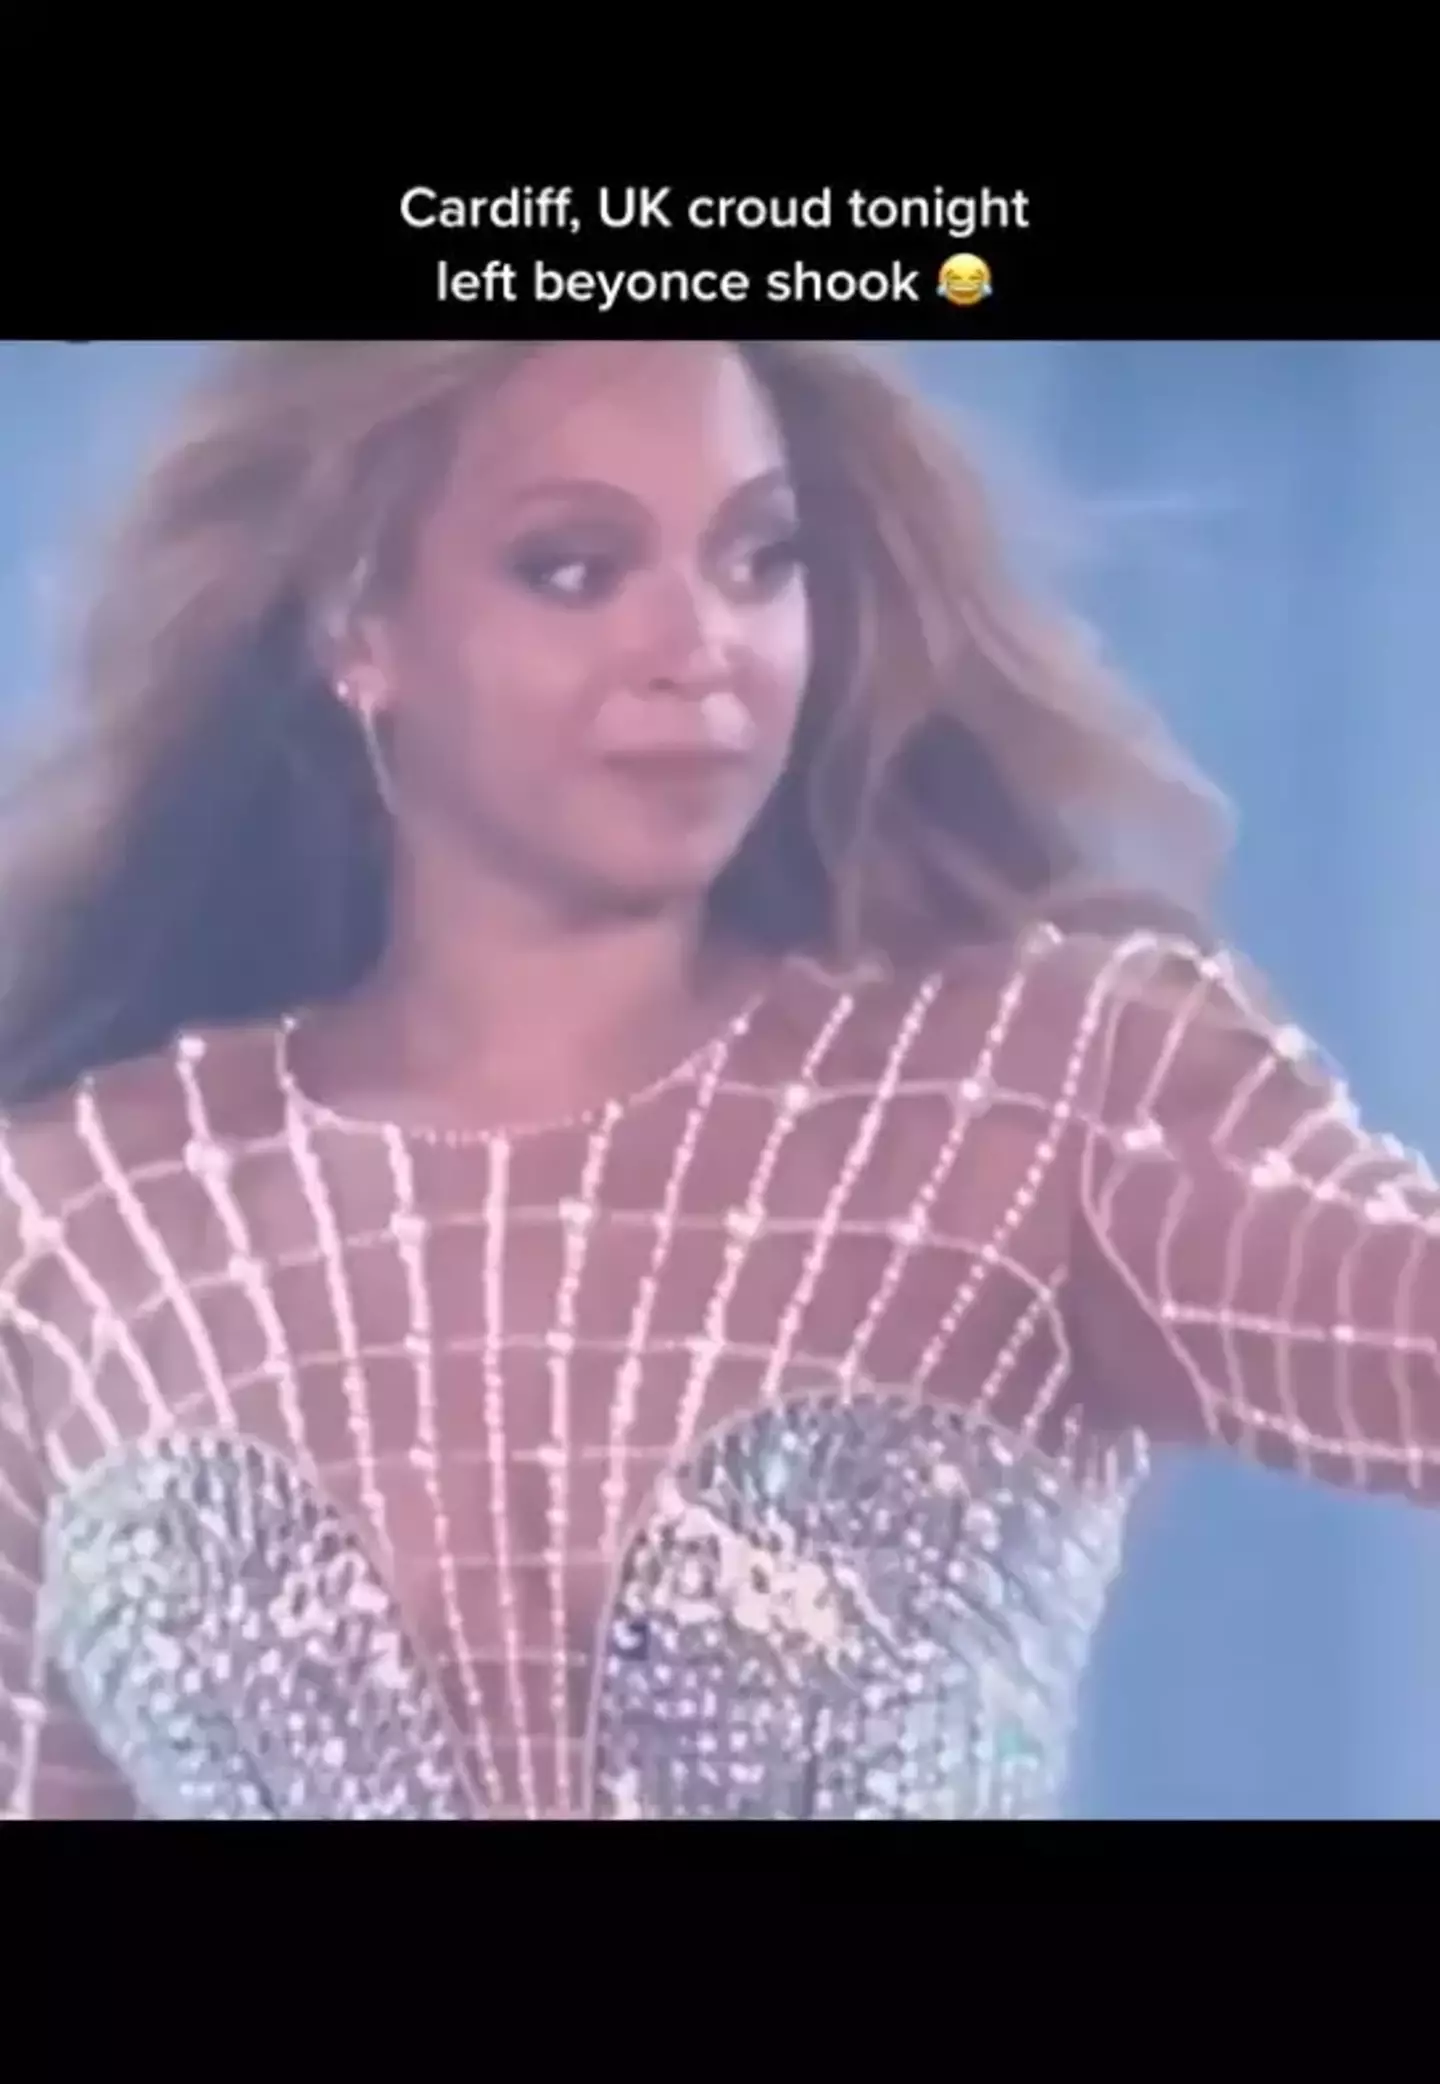 Beyonce was left 'shook' by the Welsh crowd.